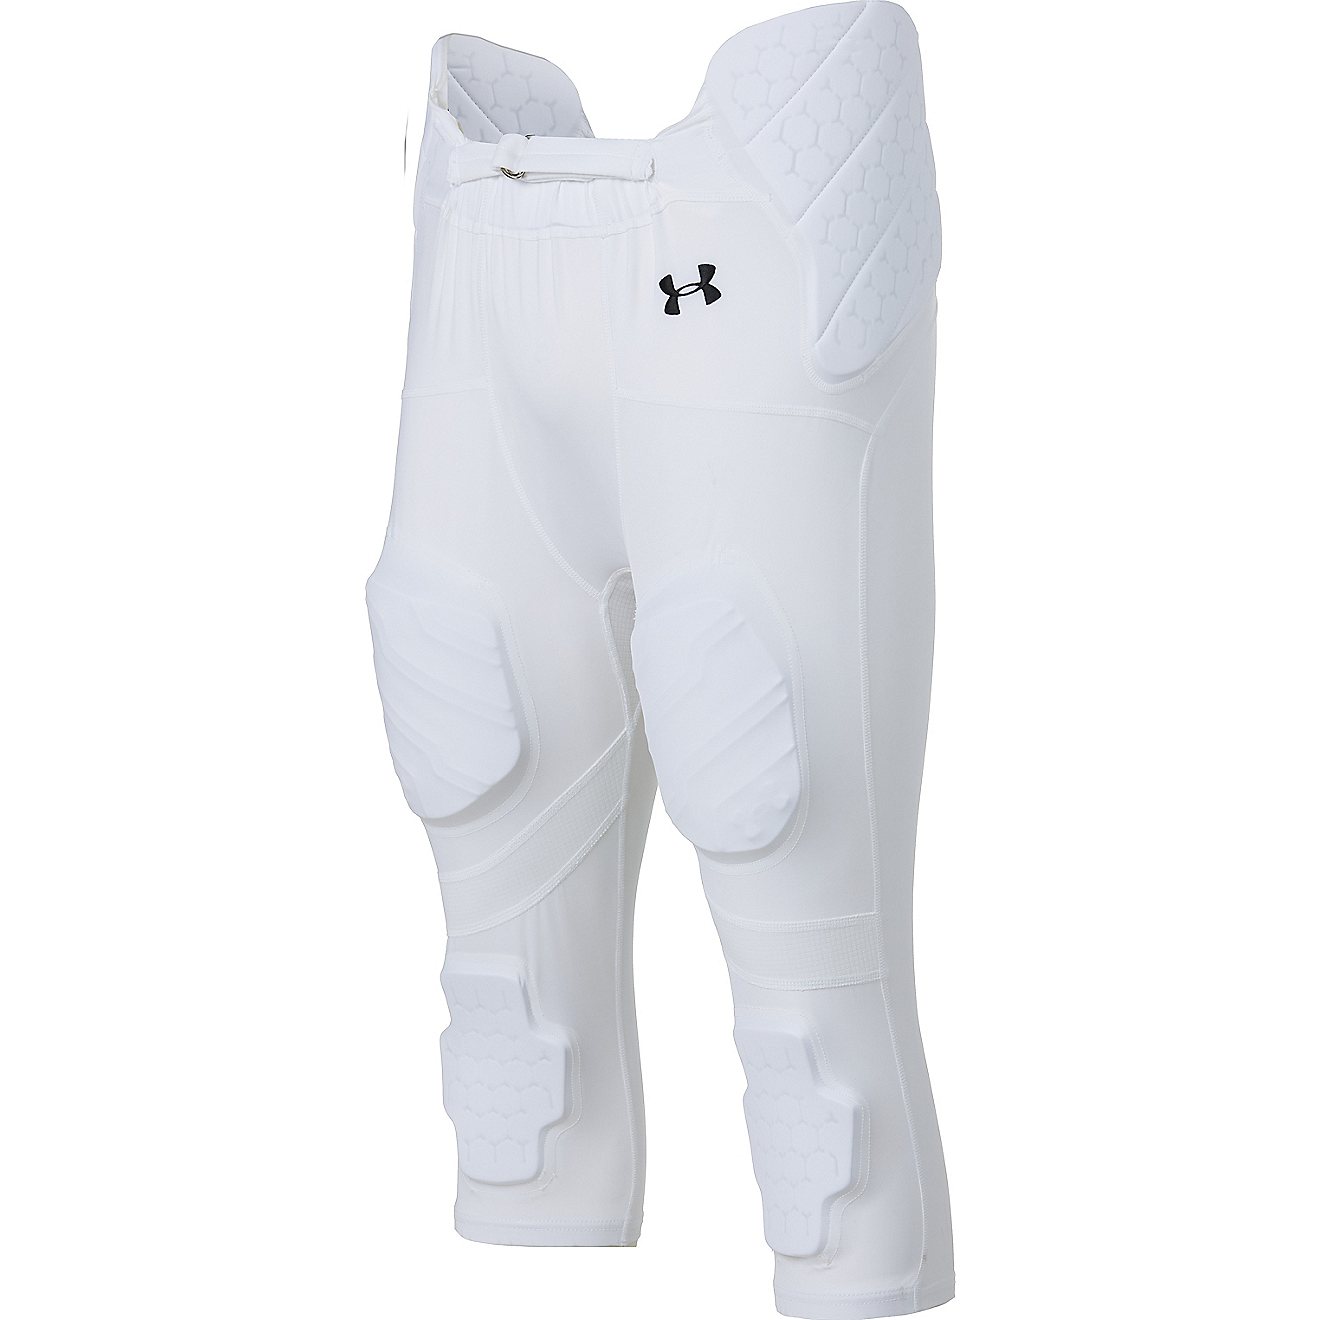 Under Armour Men's Gameday Integrated Football Pants                                                                             - view number 6